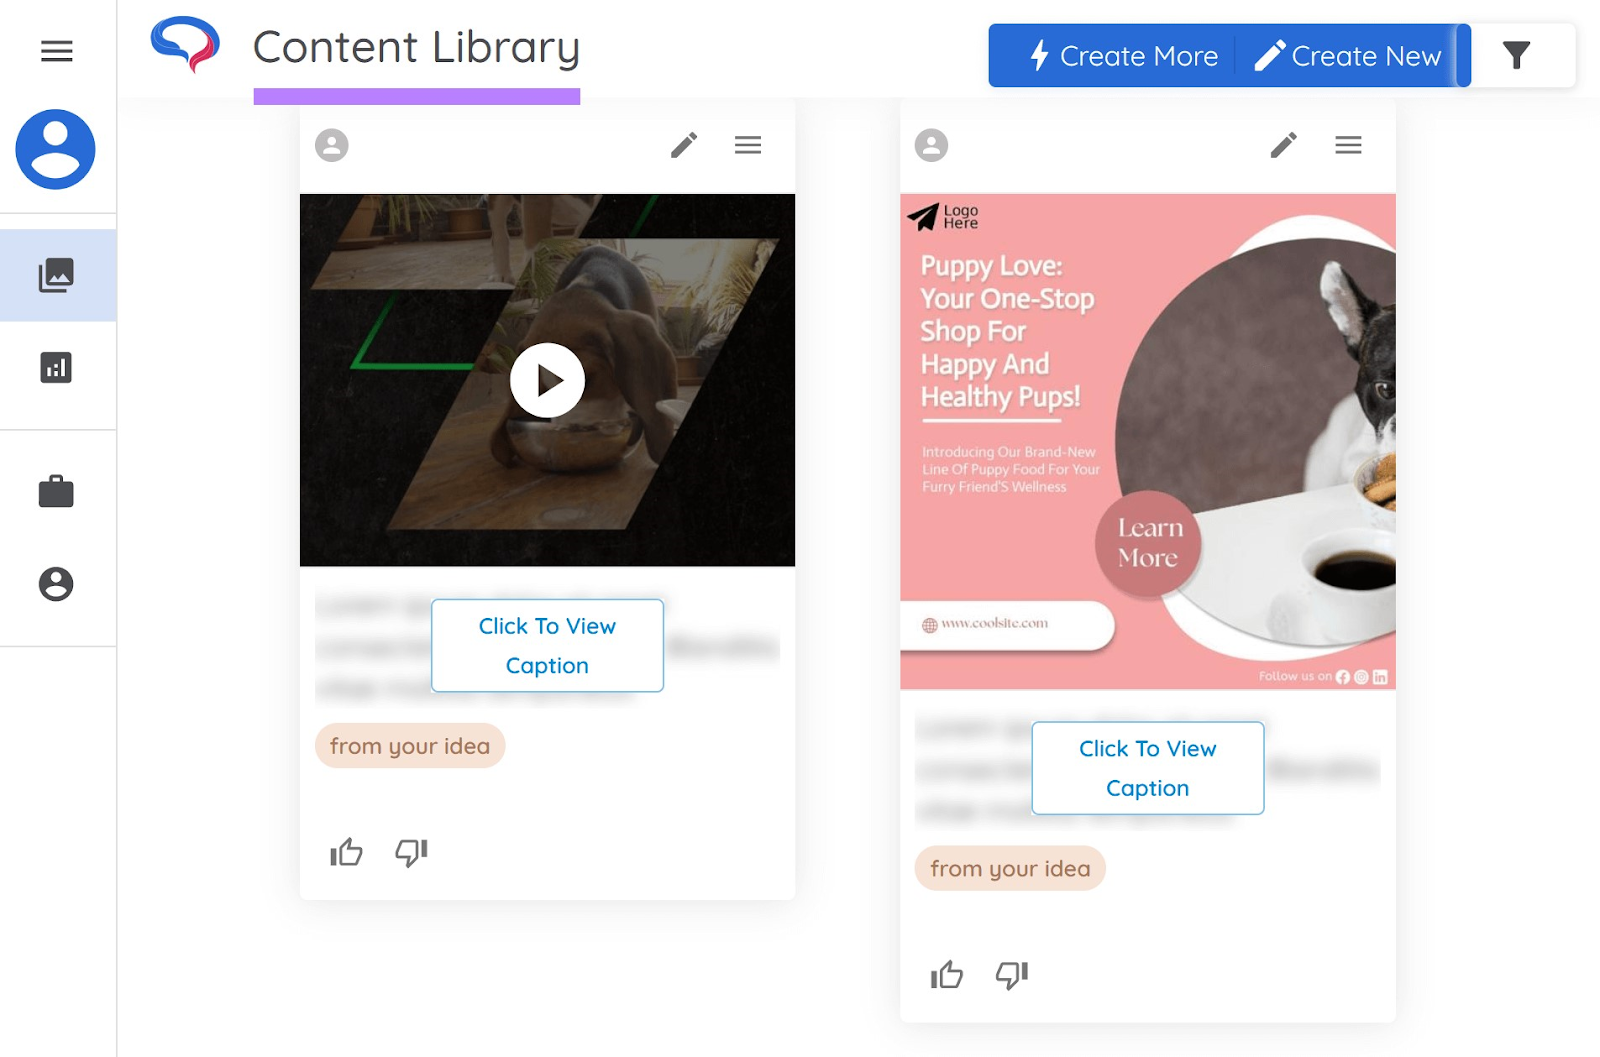 “Content Library” page